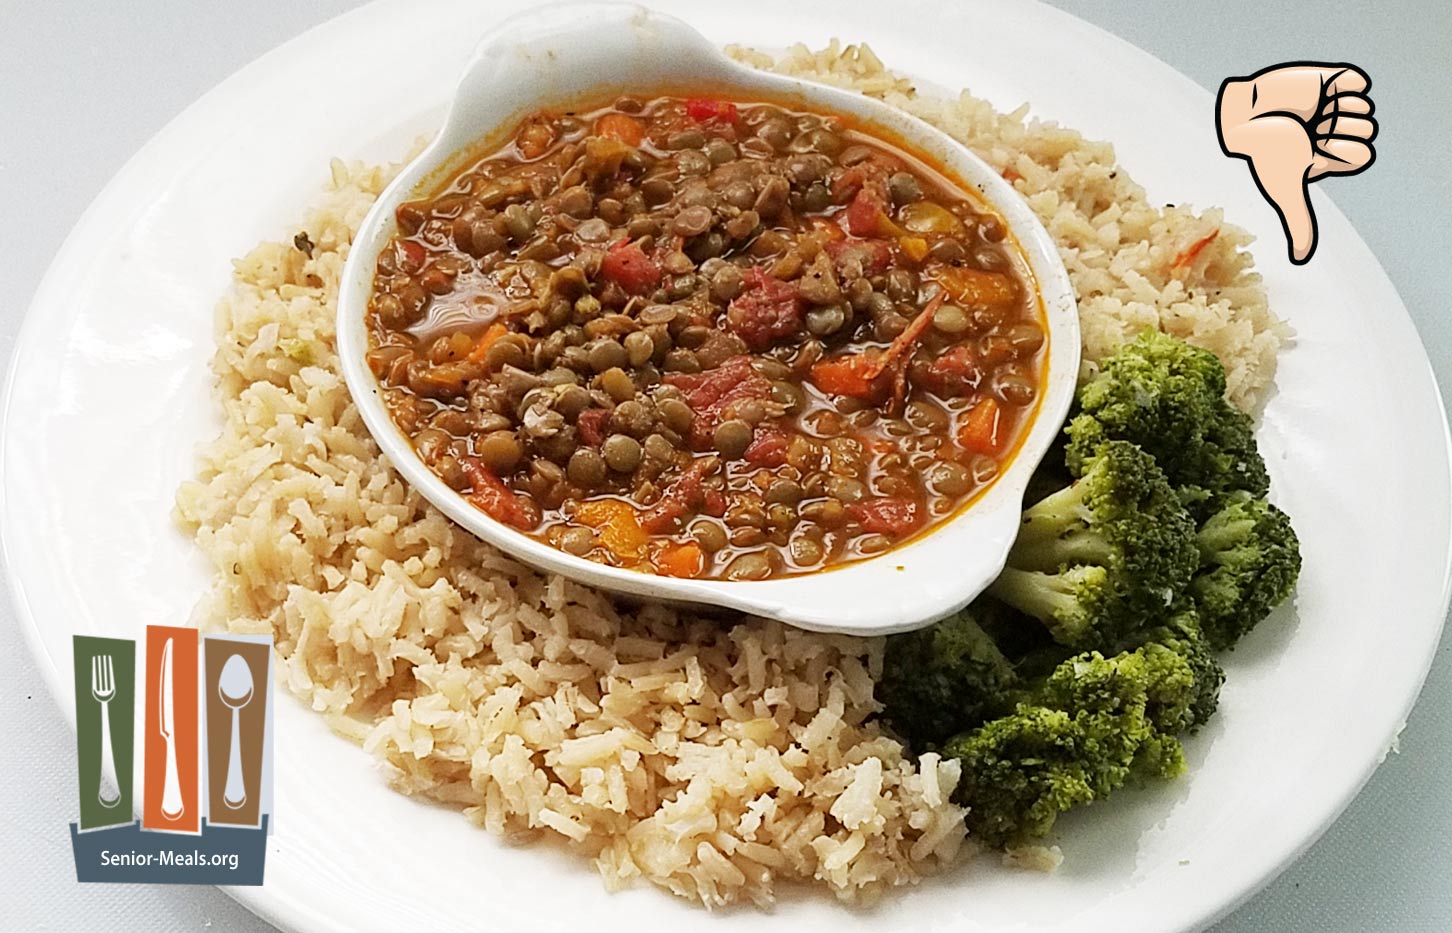 Lentil Chili with Brown Rice with Scallions and Bell Pepper and Sous-Vide Broccoli with Onions - $15